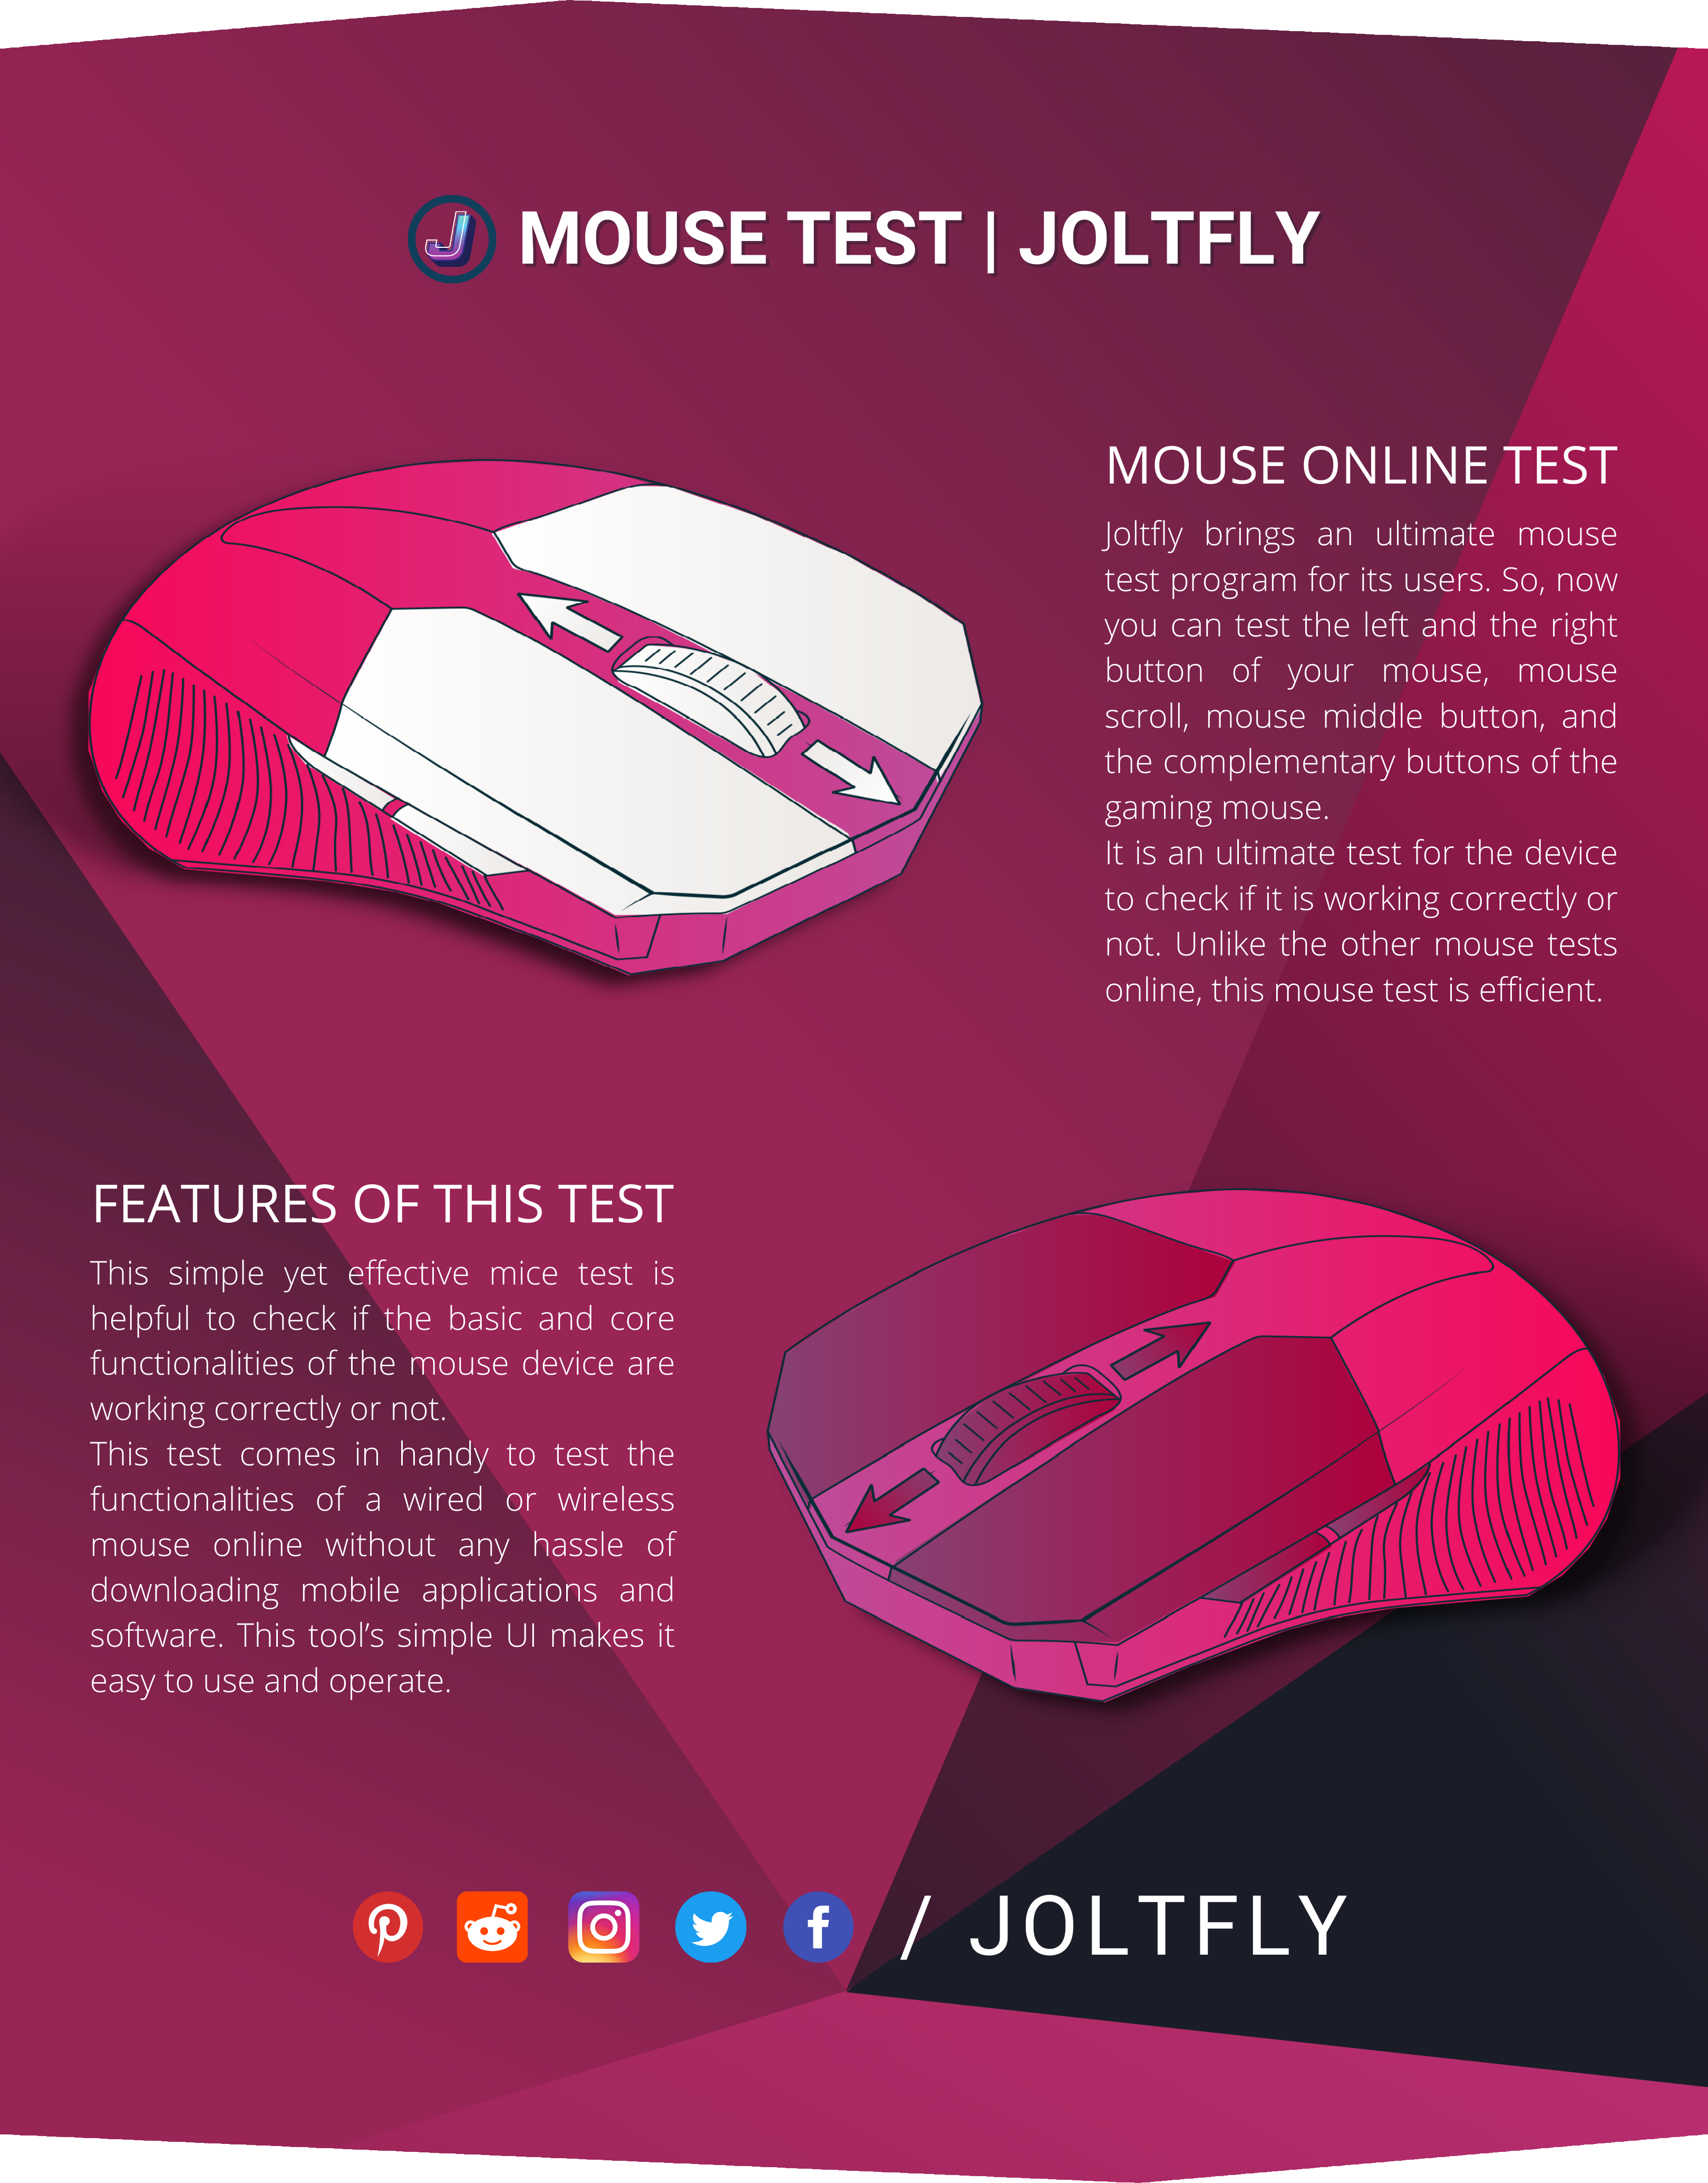 Joltfly | Mouse Test Features